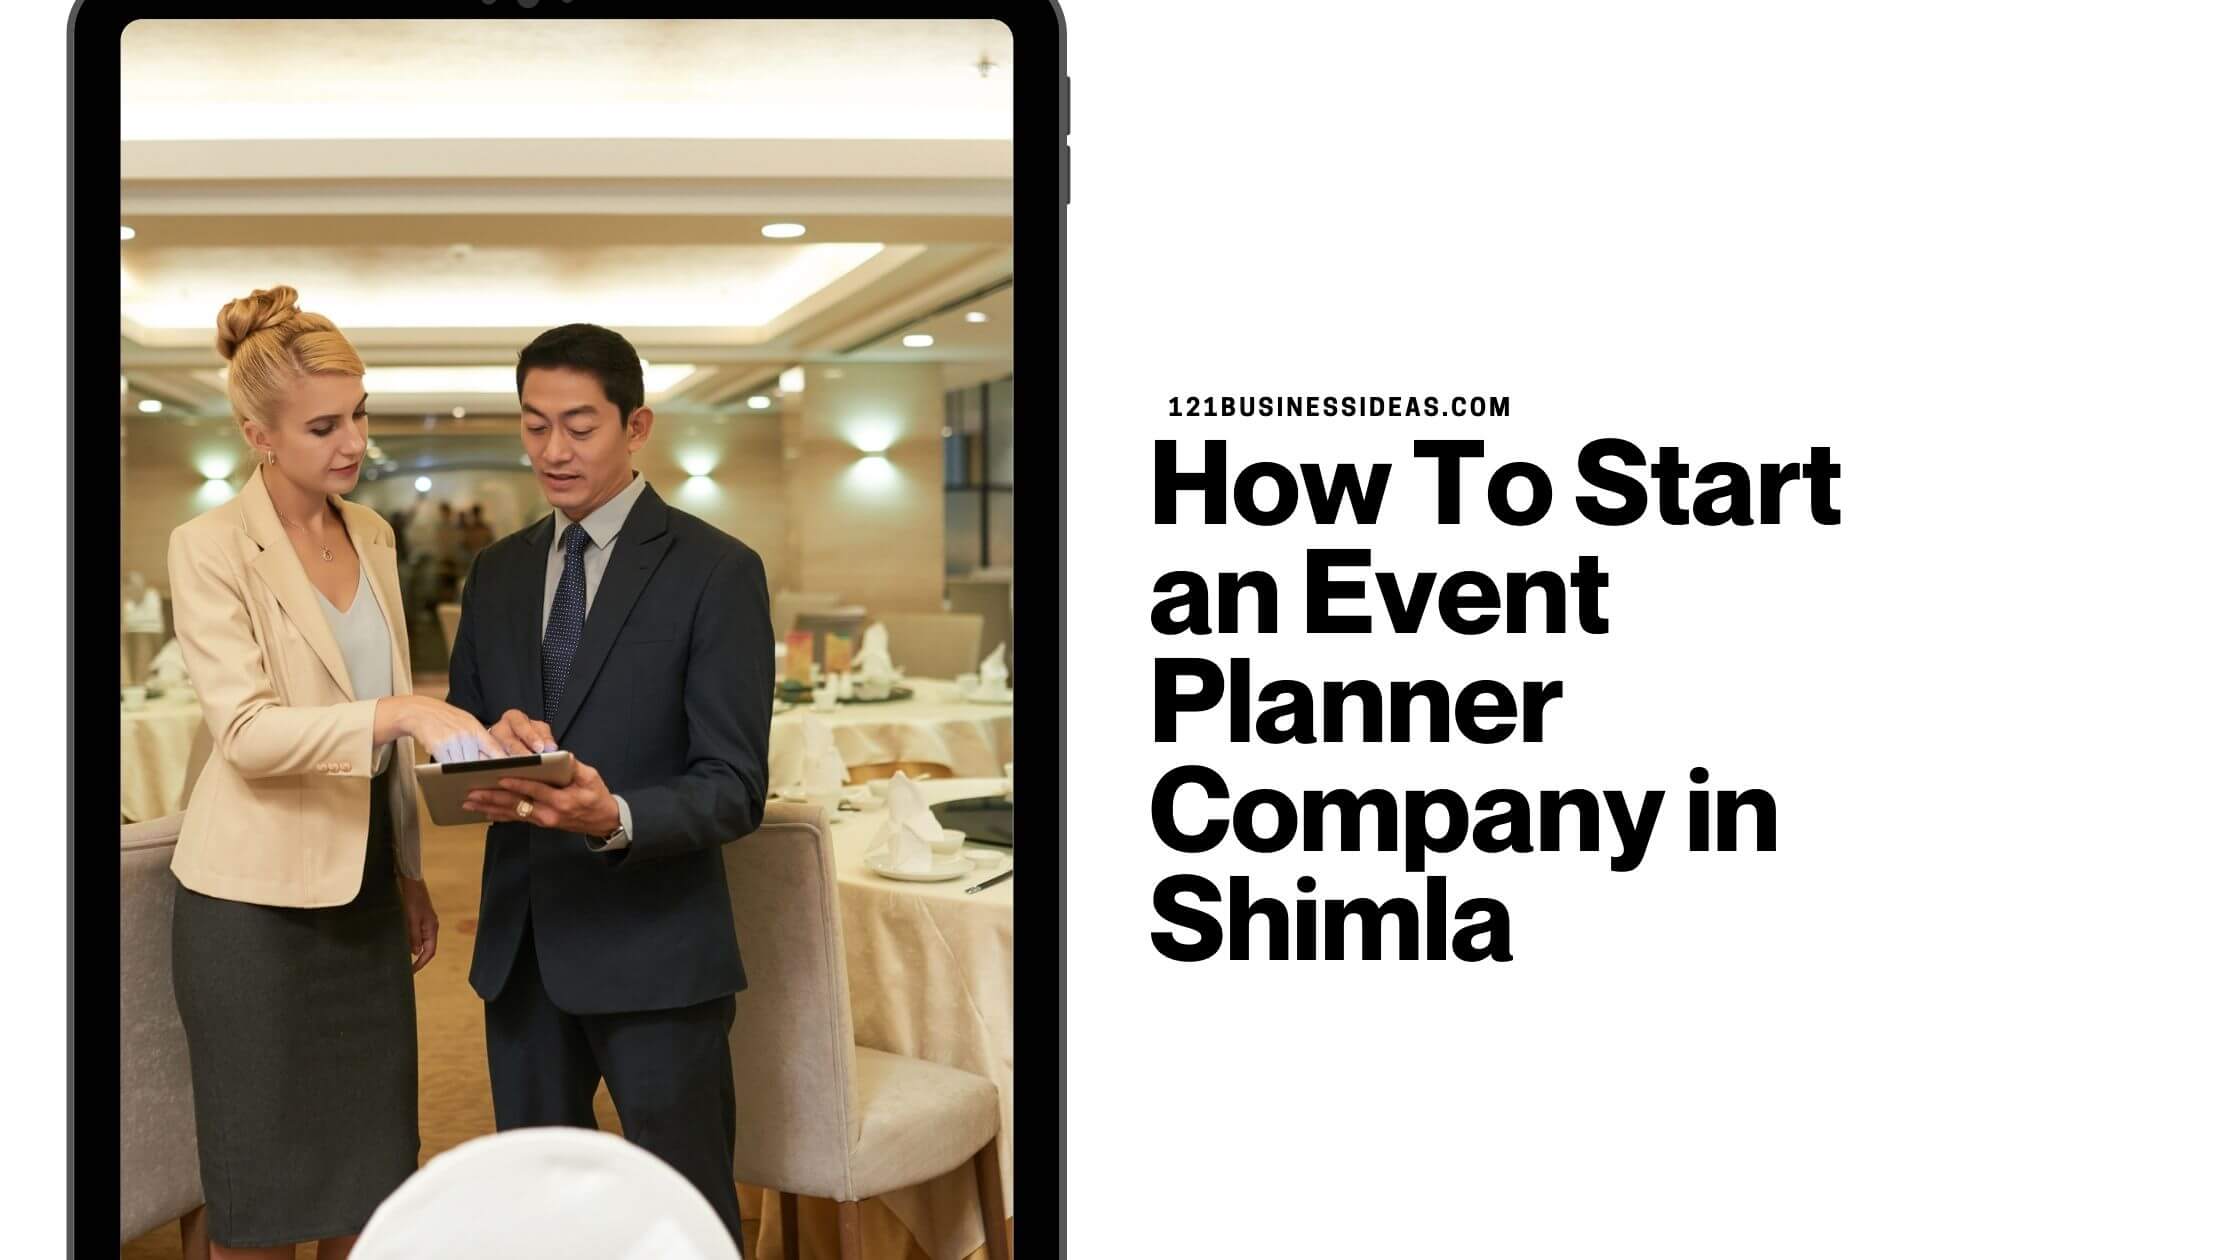 How To Start an Event Planner Company in Shimla (1)